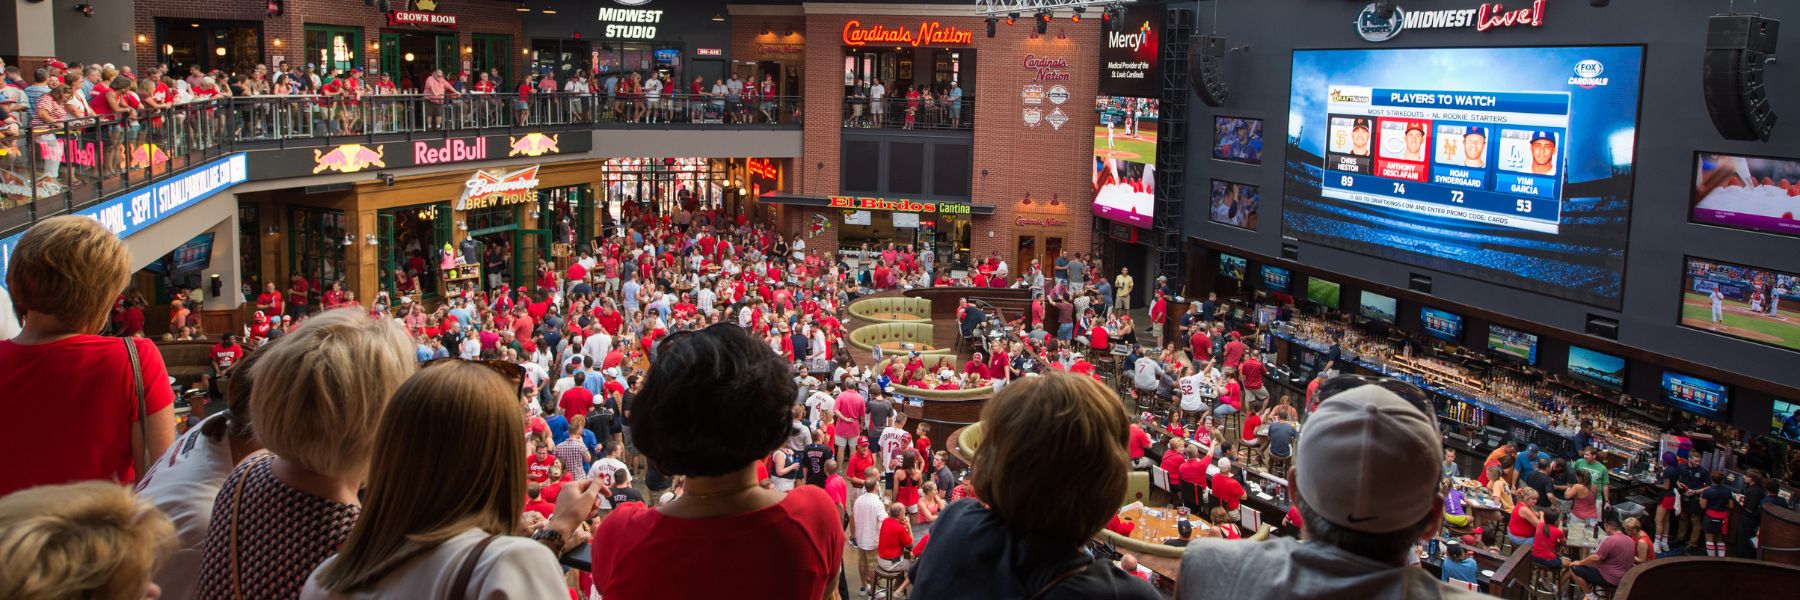 Cardinals fans watch the game on the gigantic screen at Ballpark Village.